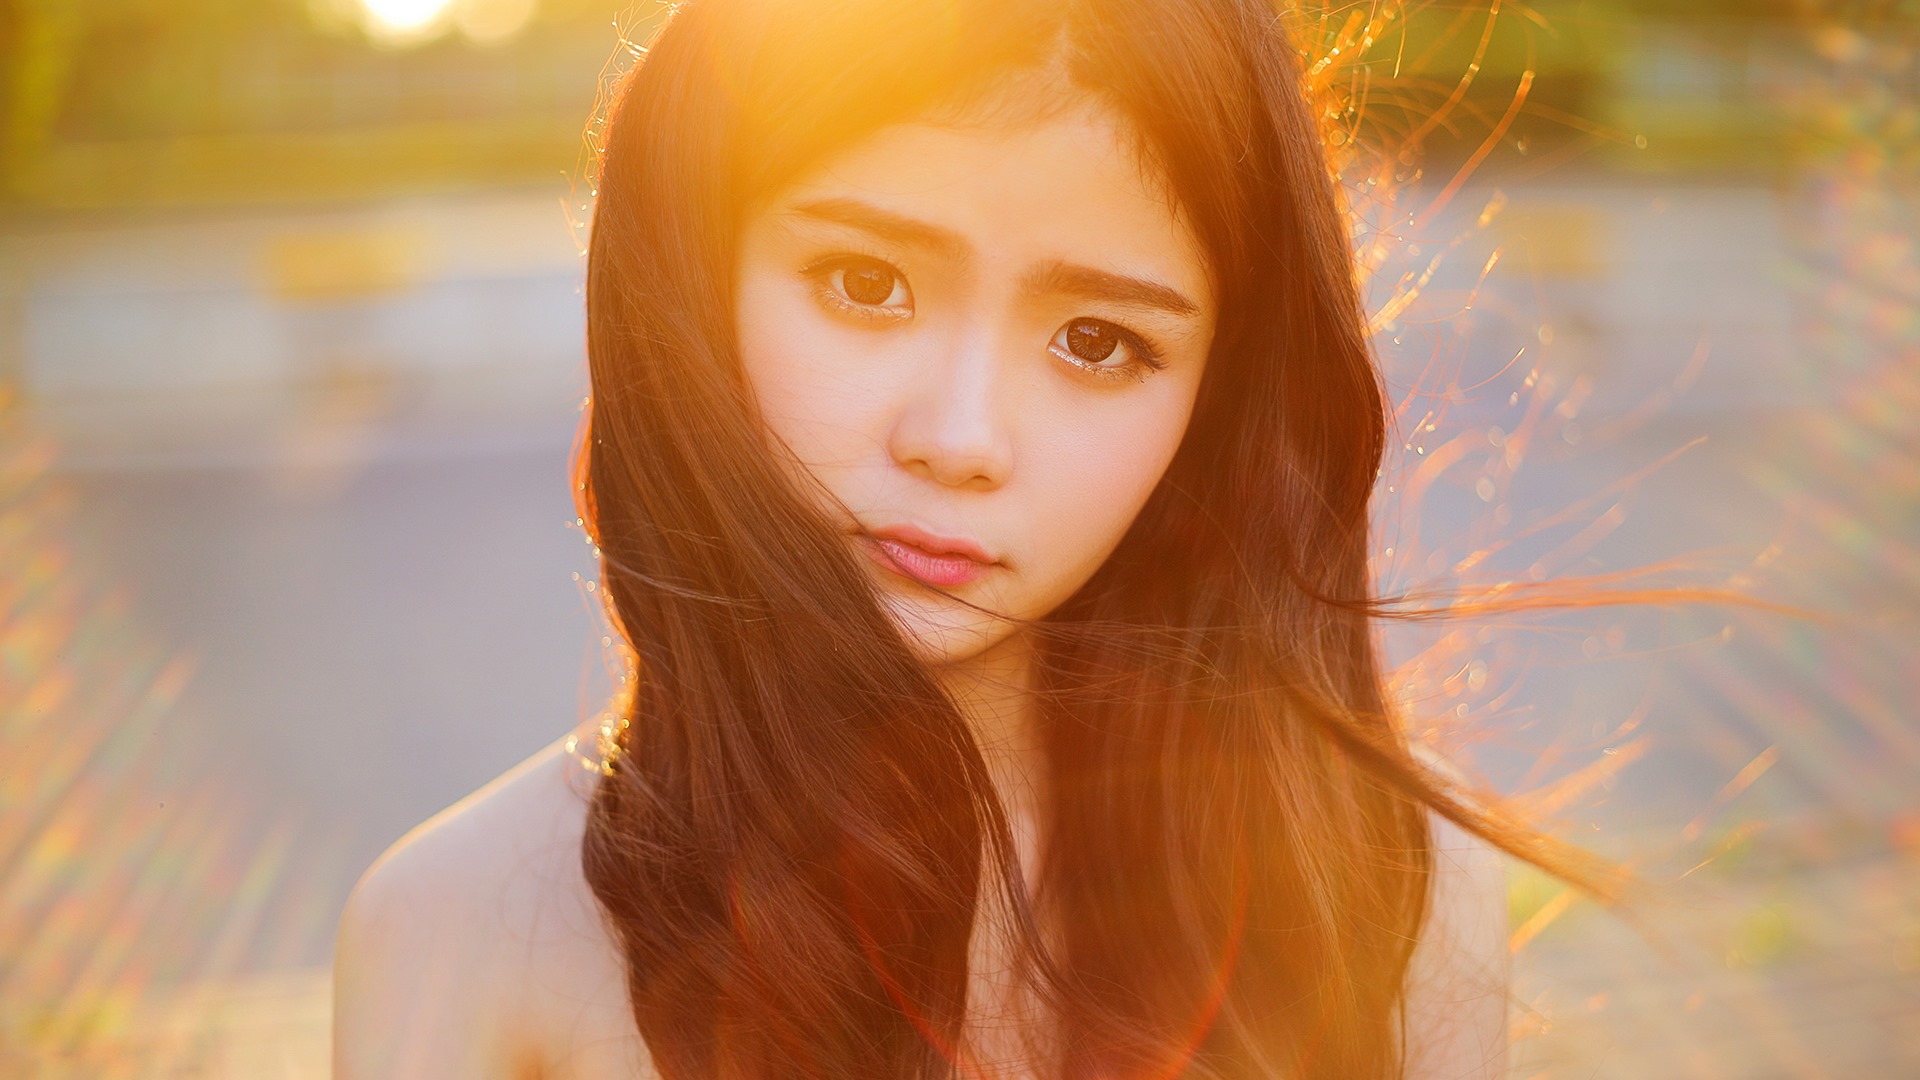 Pure and lovely young Asian girl HD wallpapers collection (3) #21 - 1920x1080